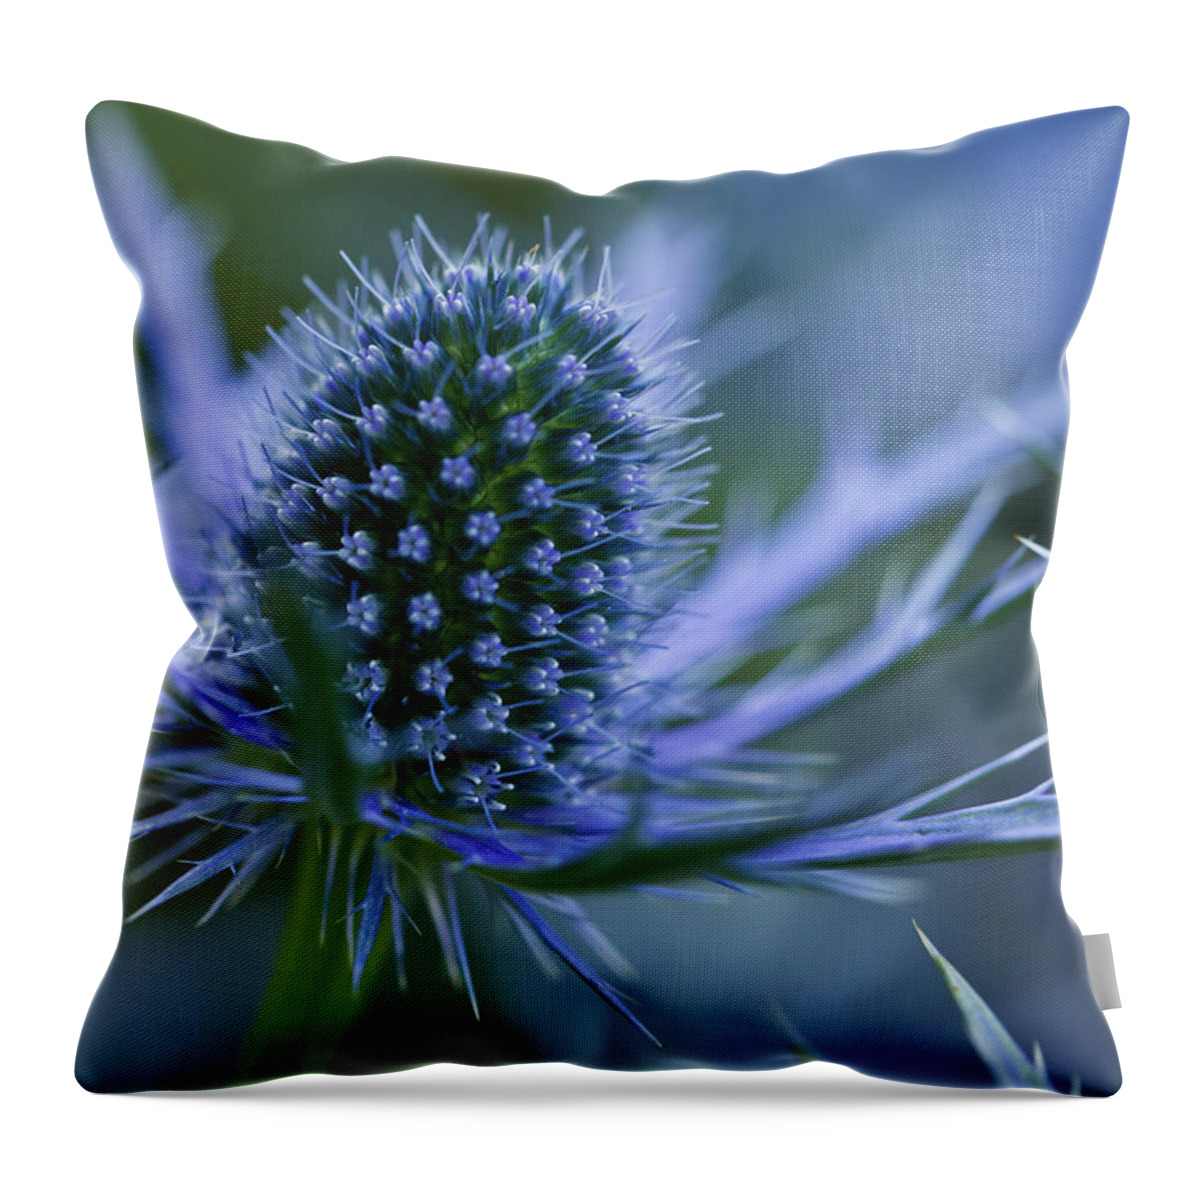 Purple Throw Pillow featuring the photograph Sea Holly by Laszlo Podor